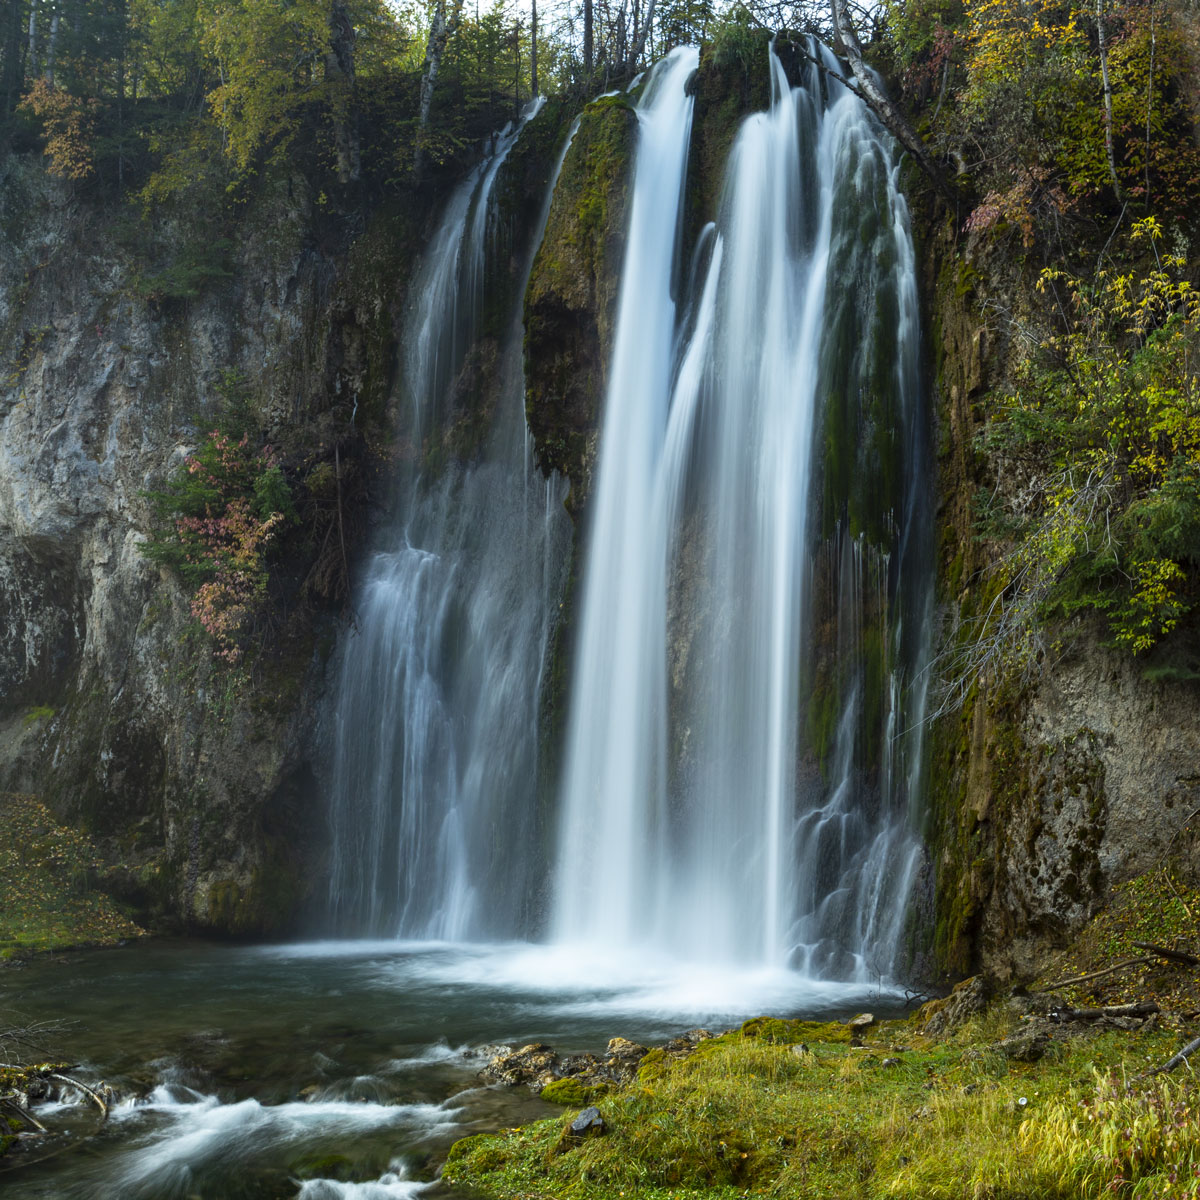 Spearfish Falls fills the picture appearing smooth and silky white against a backdrop of the canyon wall adorned in yellow, orange and green foliage.